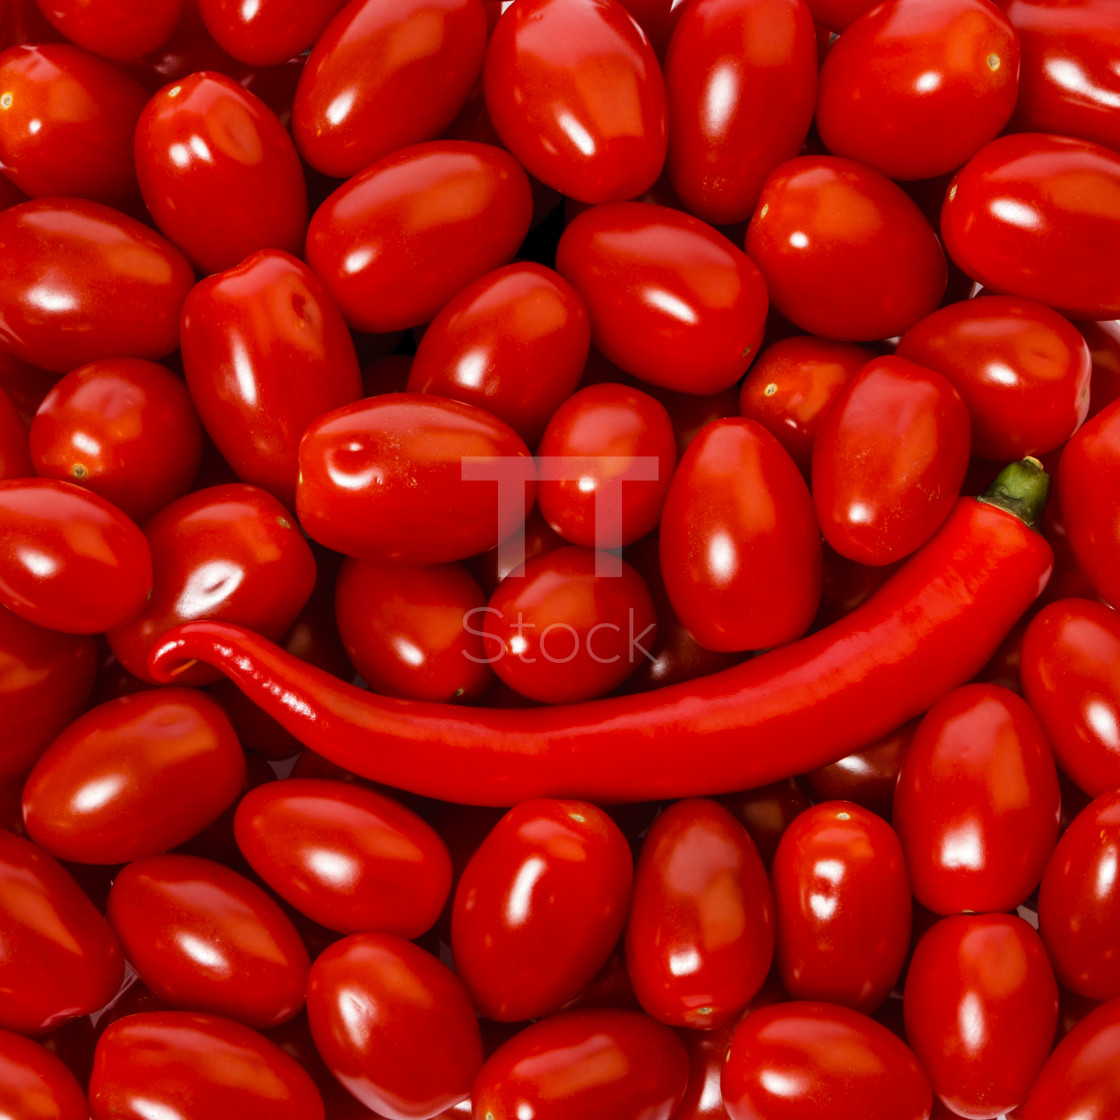 "Red hot chilli pepper" stock image